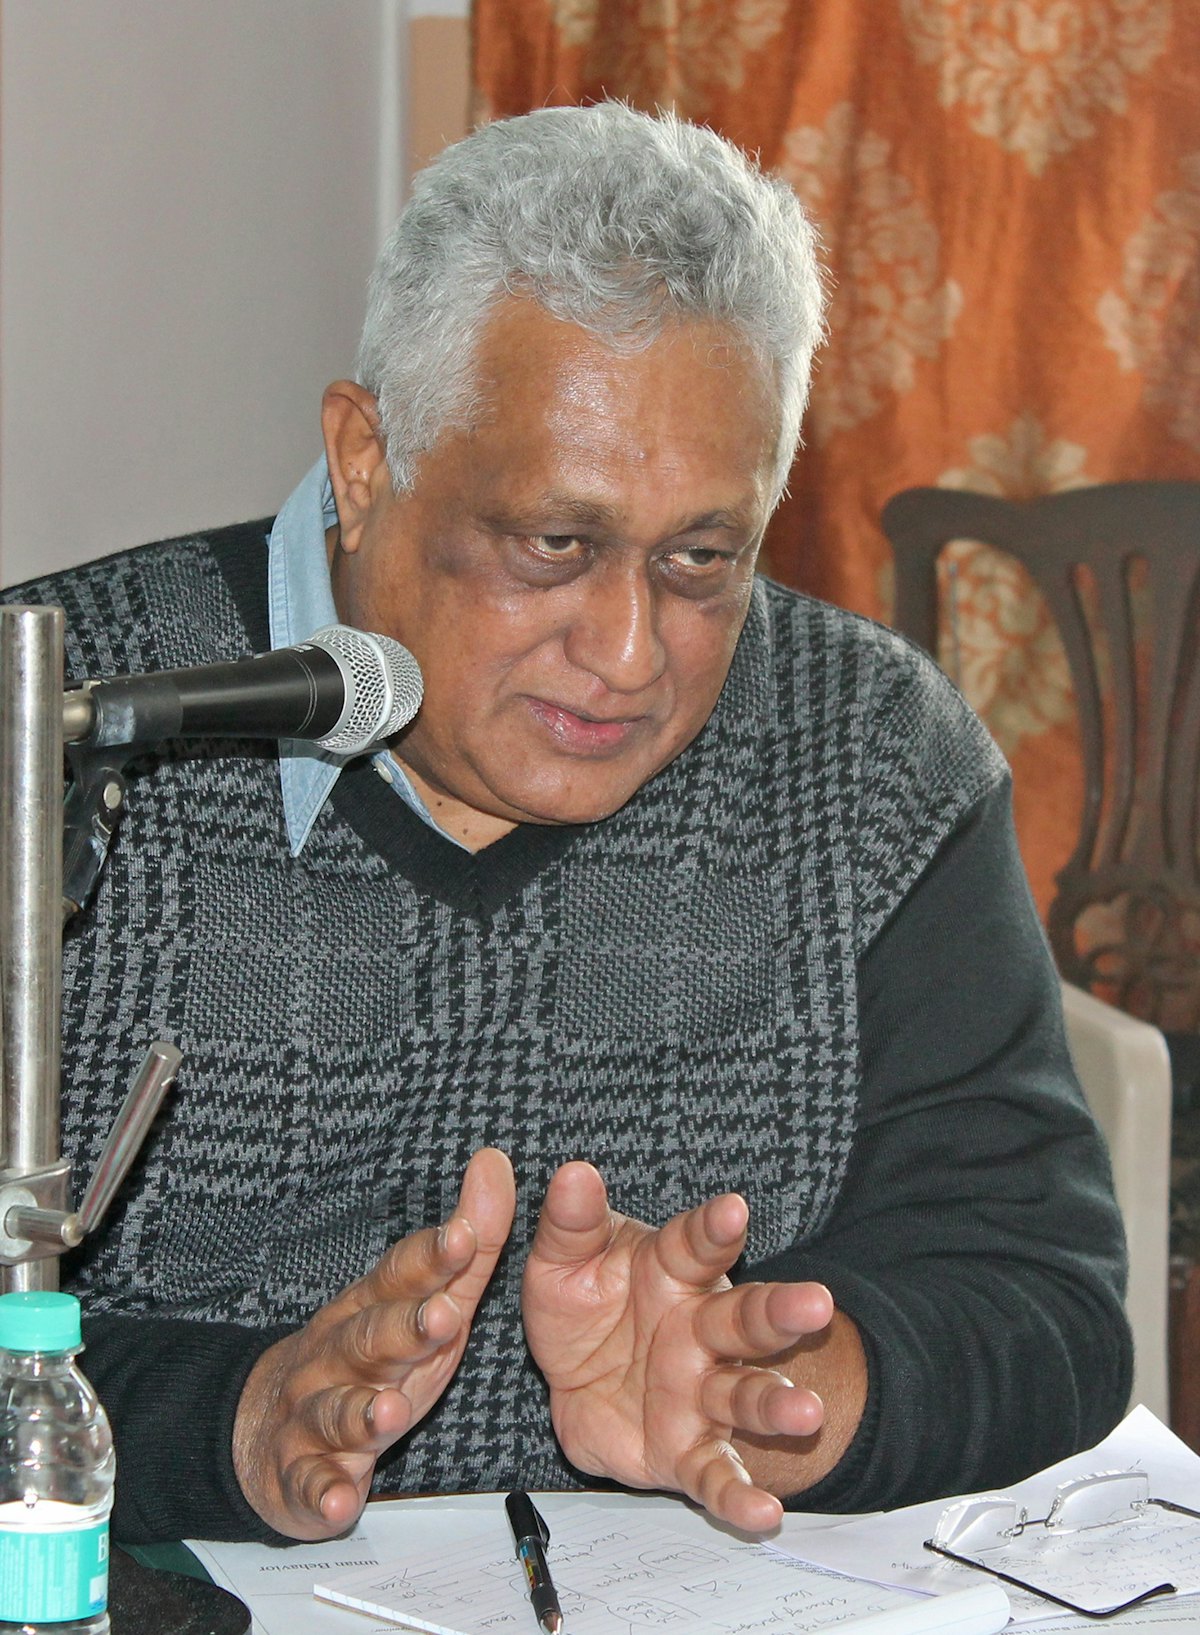 Professor Shiv Visvanathan of O.P. Jindal Global University speaks about freedom of religion and belief at a conference in New Delhi on 5 March.